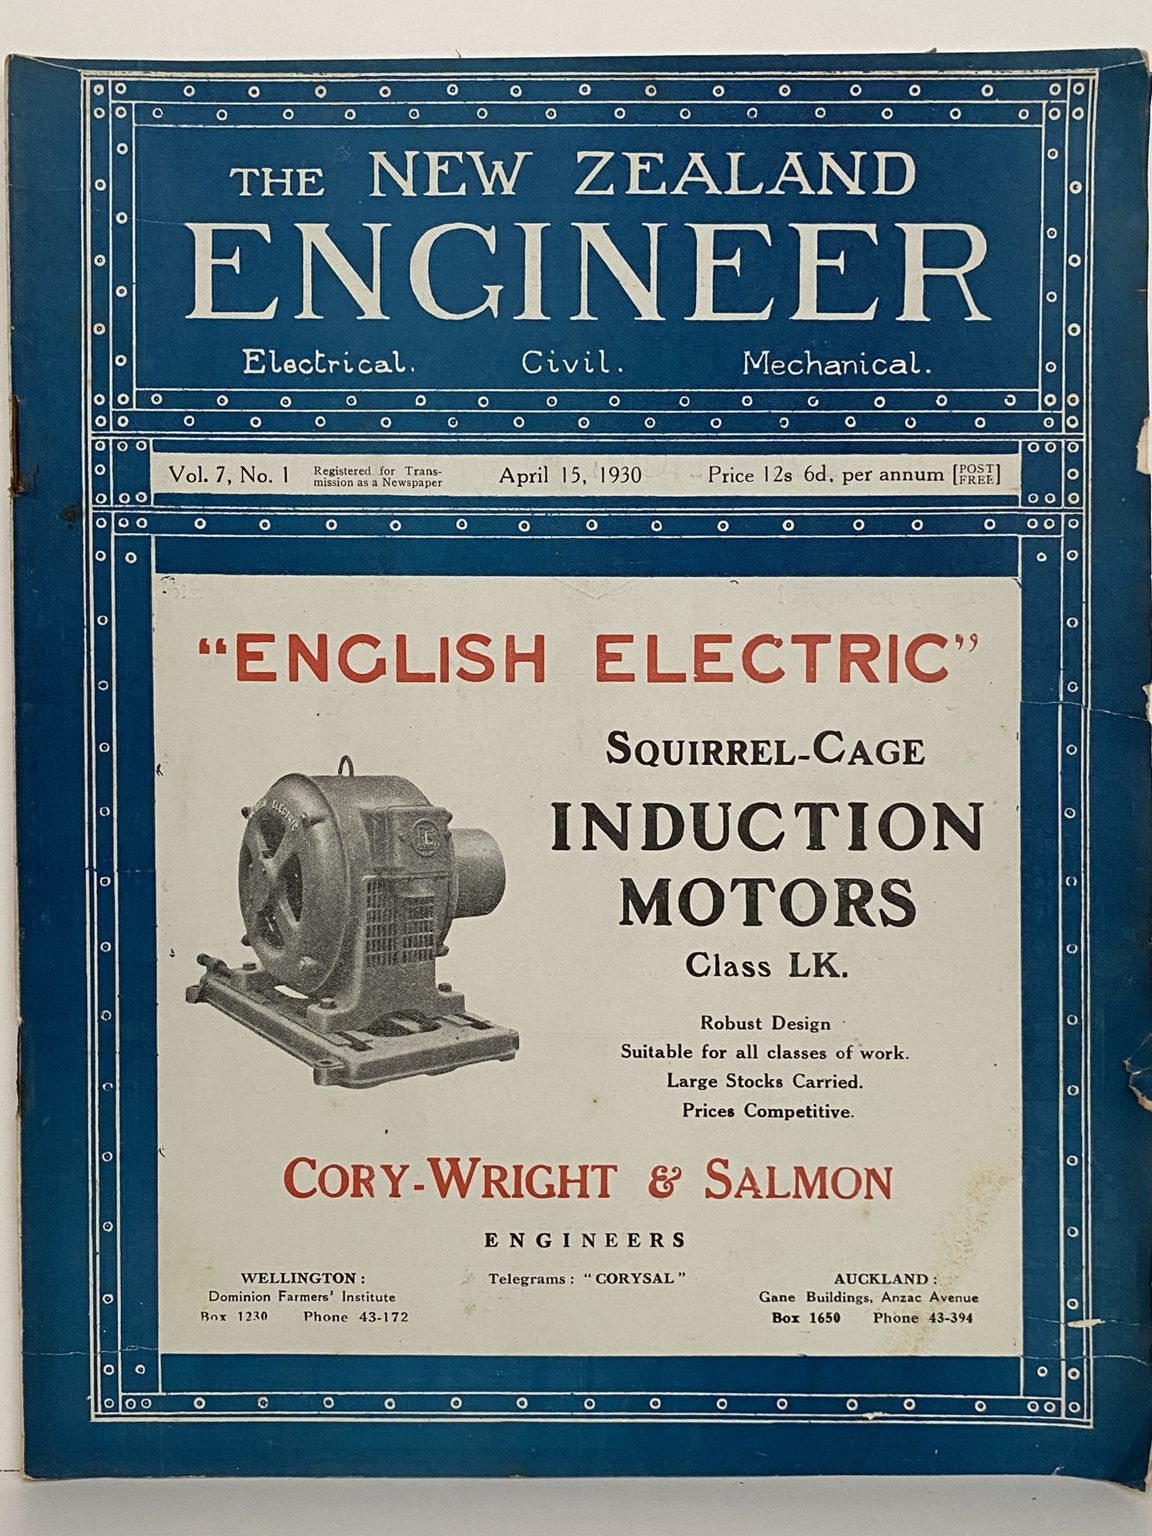 OLD MAGAZINE: The New Zealand Engineer Vol. 7, No. 1 - 15 April 1930